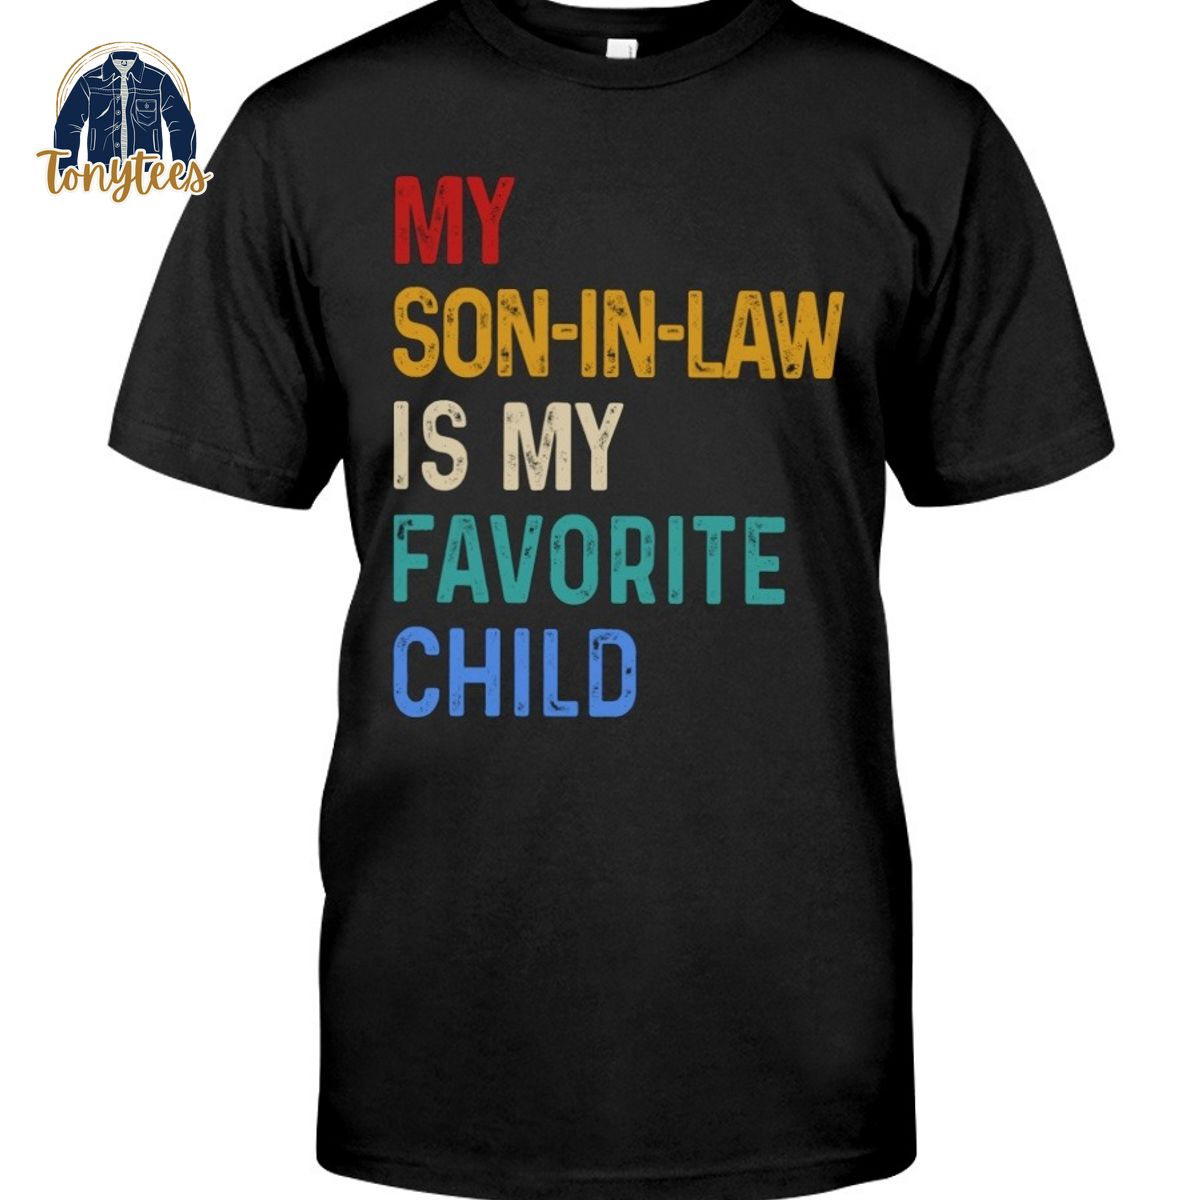 My Son-In-Law Is My Favorite Child Shirt